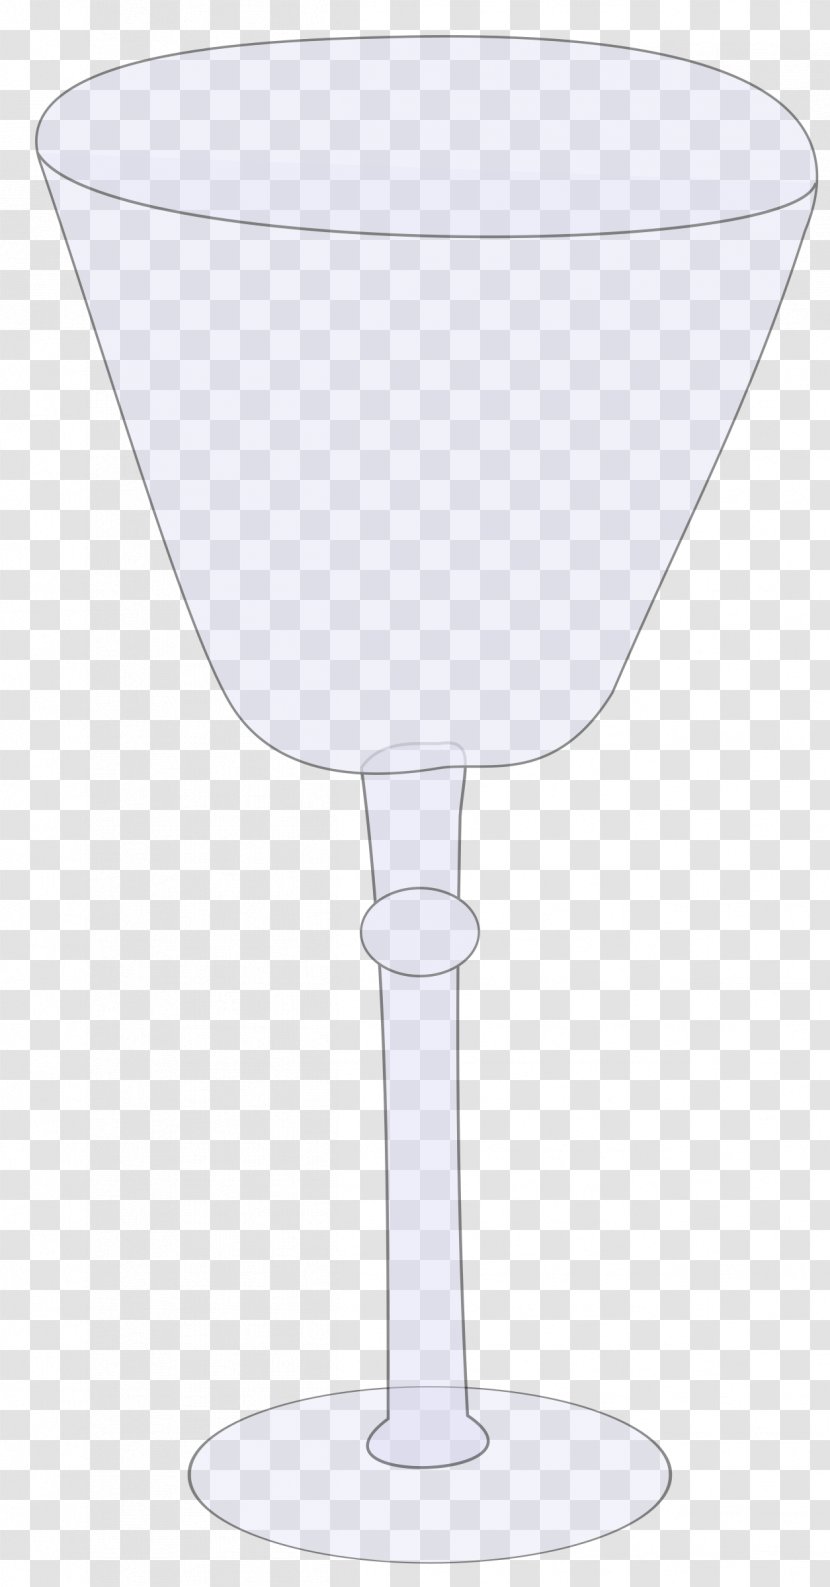 Wine Glass Drink Stemware - Champagne - Wineglass Transparent PNG